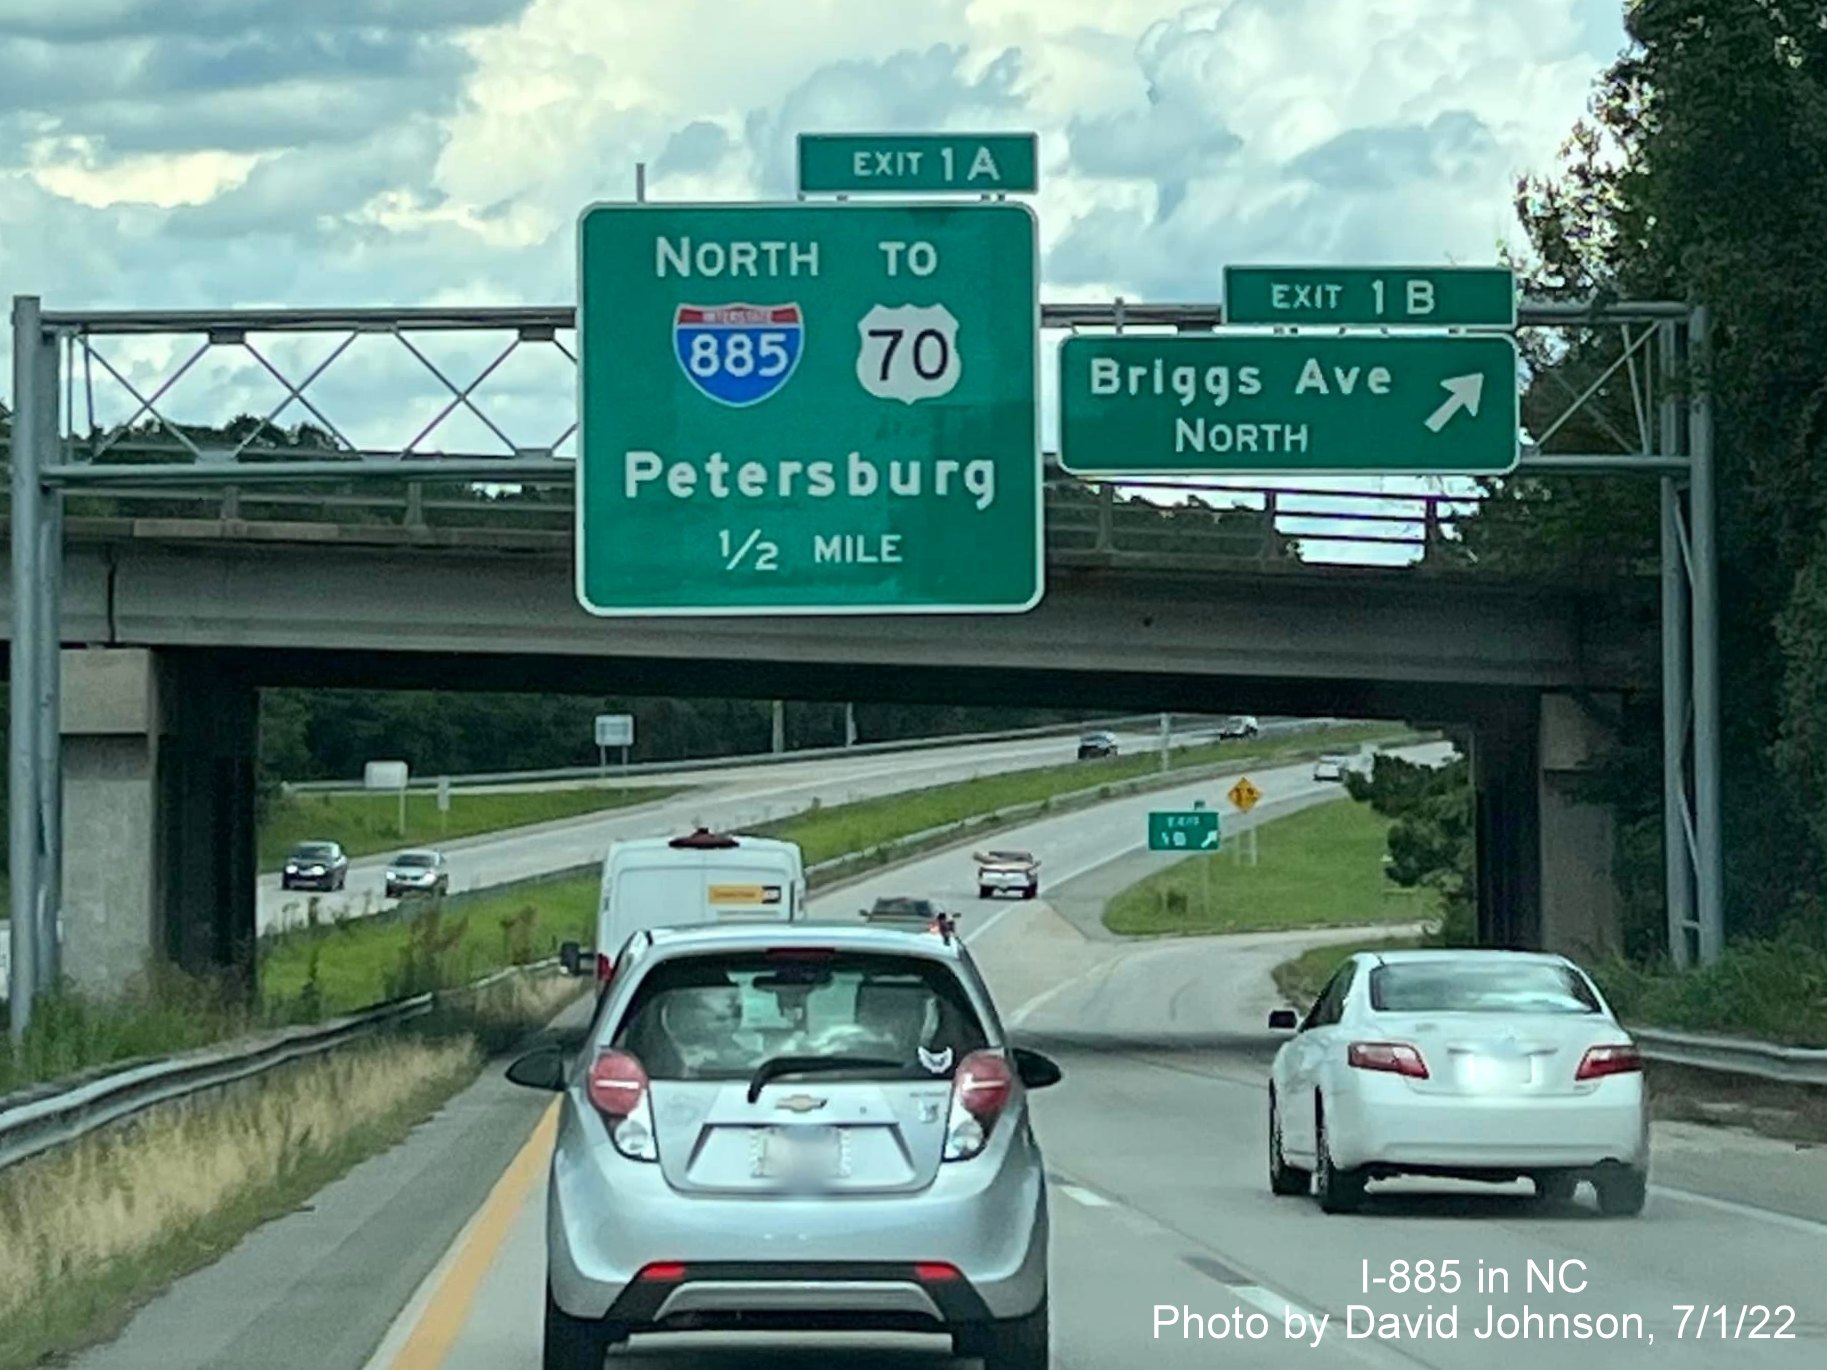 Image of I-885 North 3/4 mile advance sign on NC 147 South/Durham Freeway at Briggs Avenue, by David Johnson July 2022